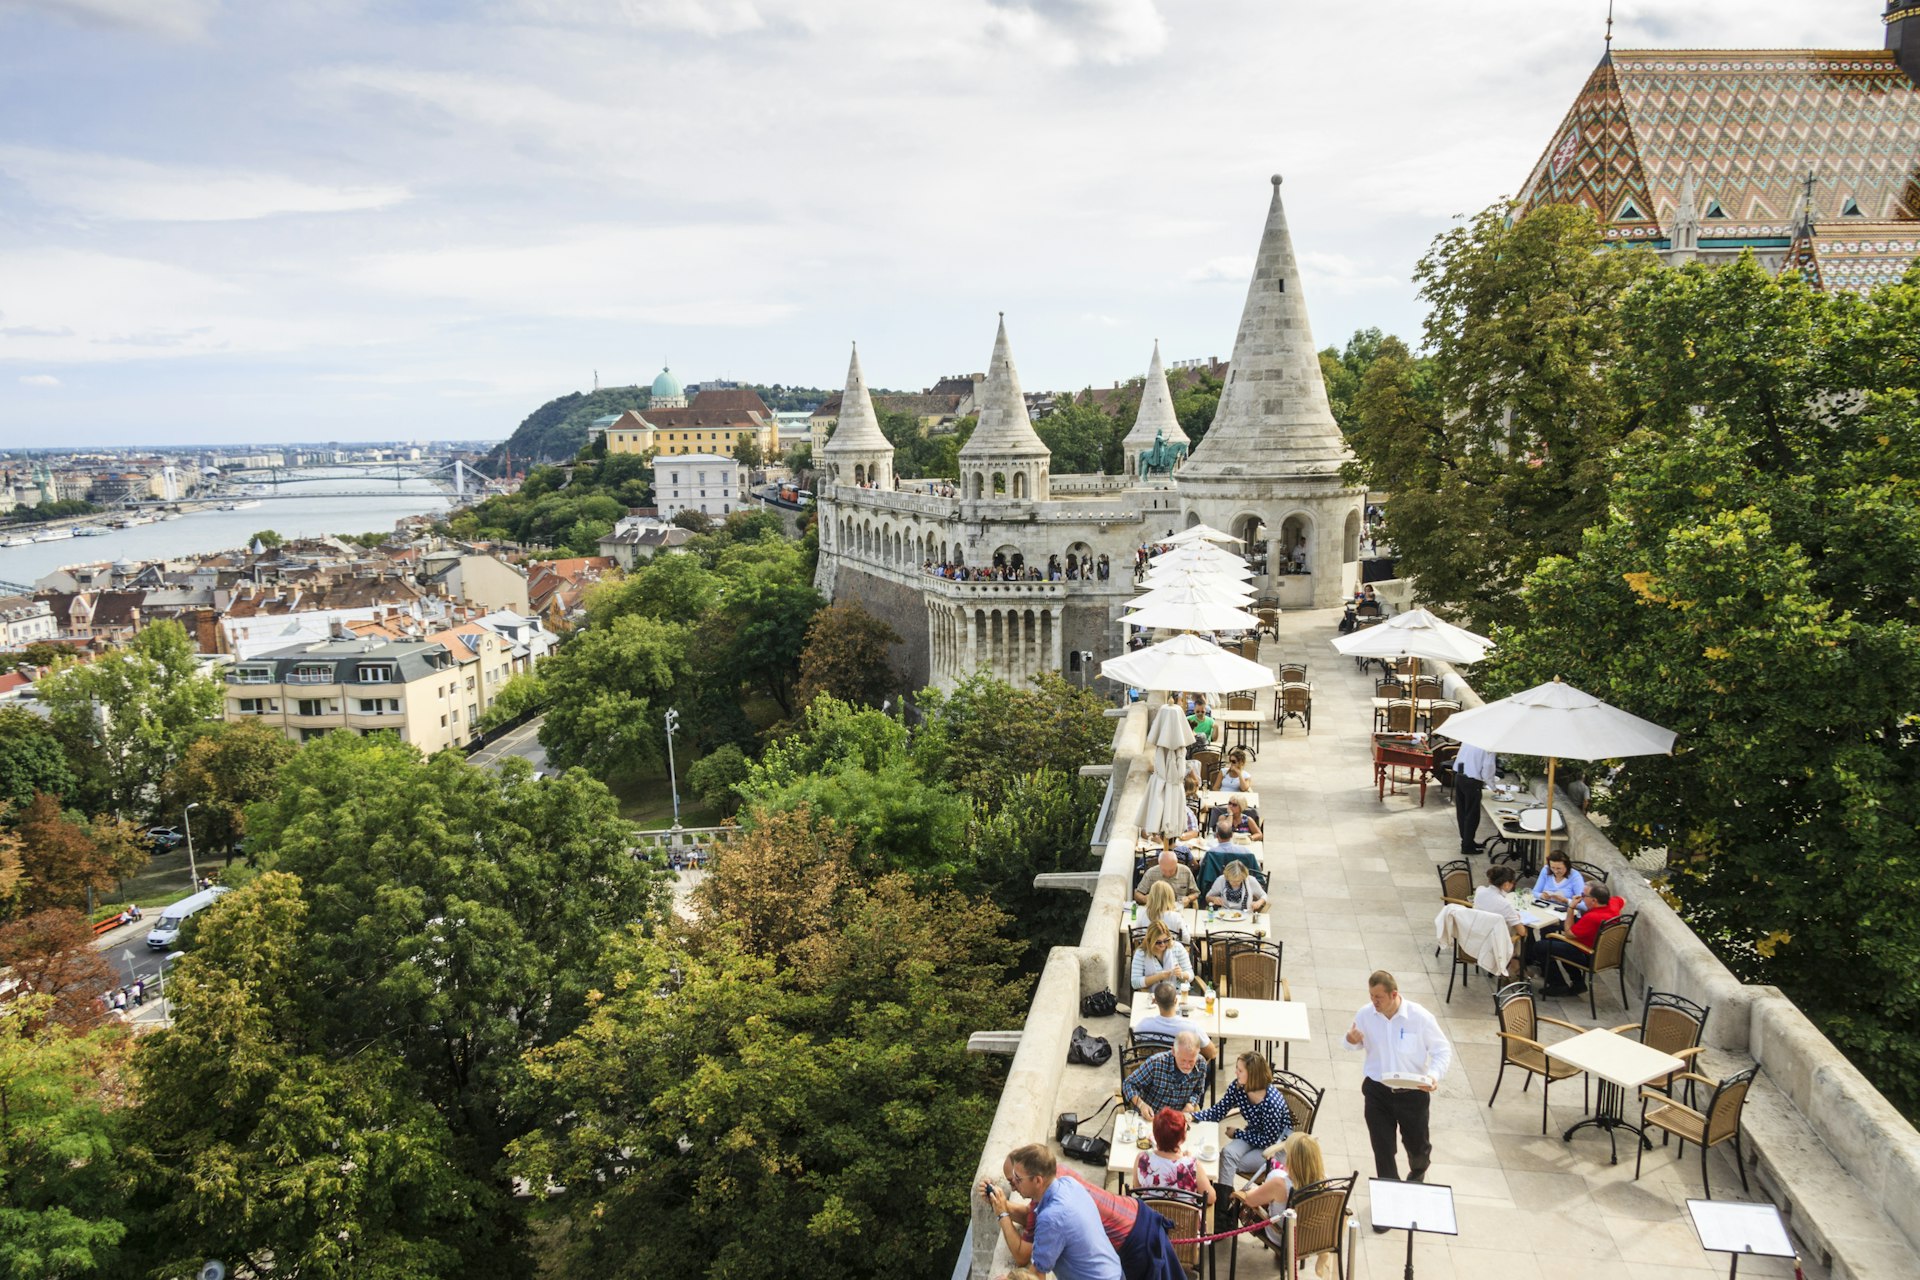 Outdoor restaurant terrace with views across the city of Budapest and down to the river